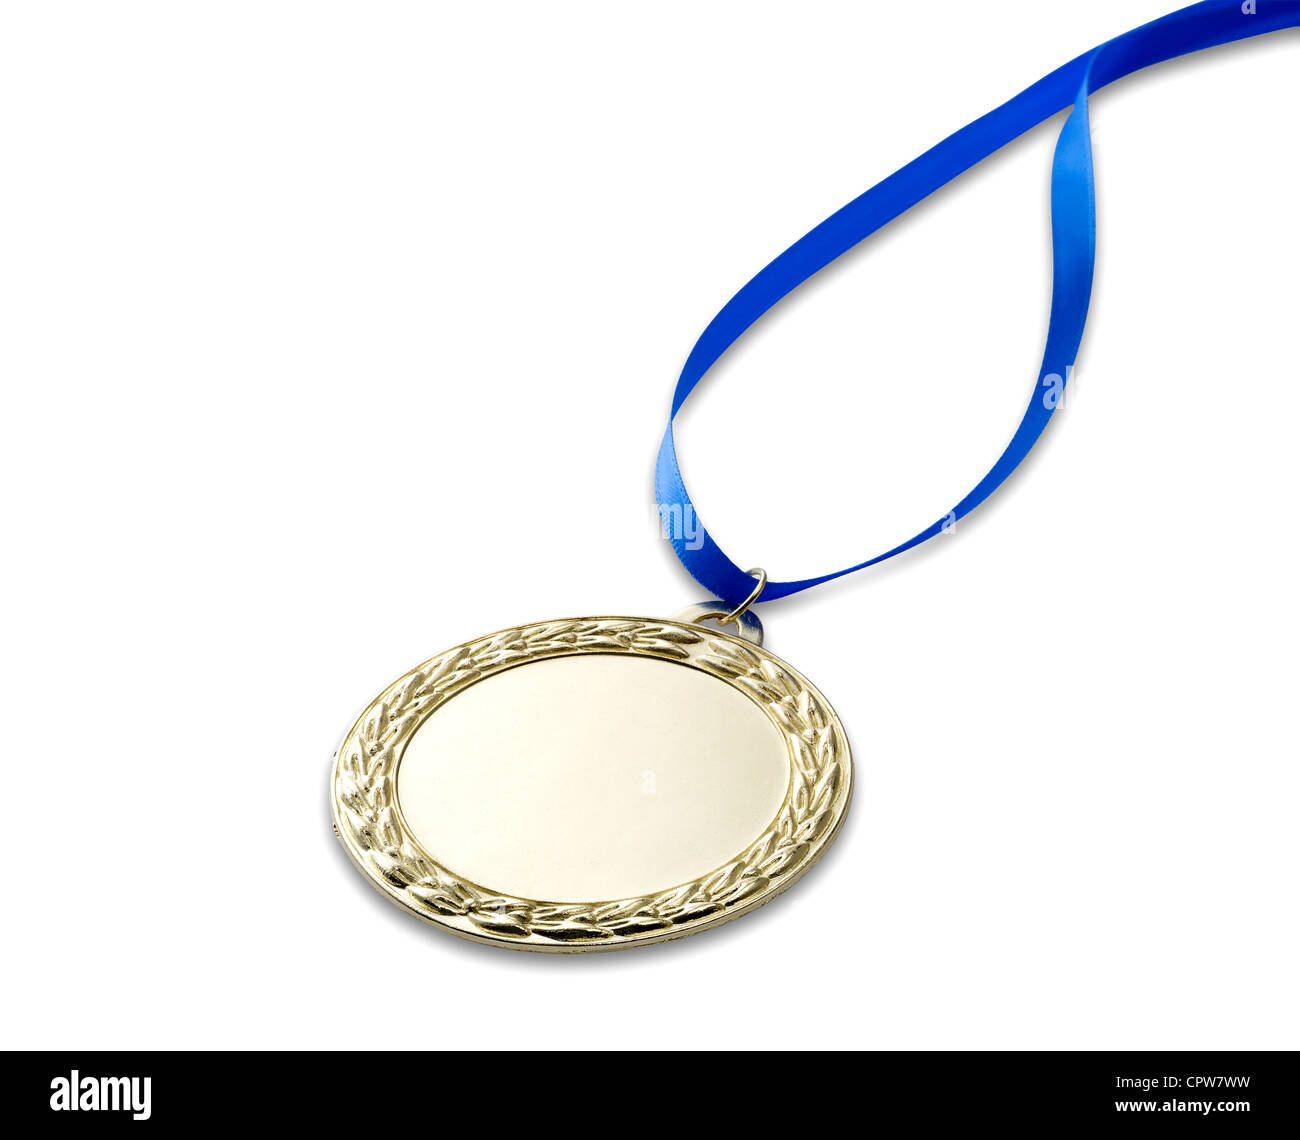 A gold olympics medal with clipping path isolated on white with blue ribbon Stock Photo